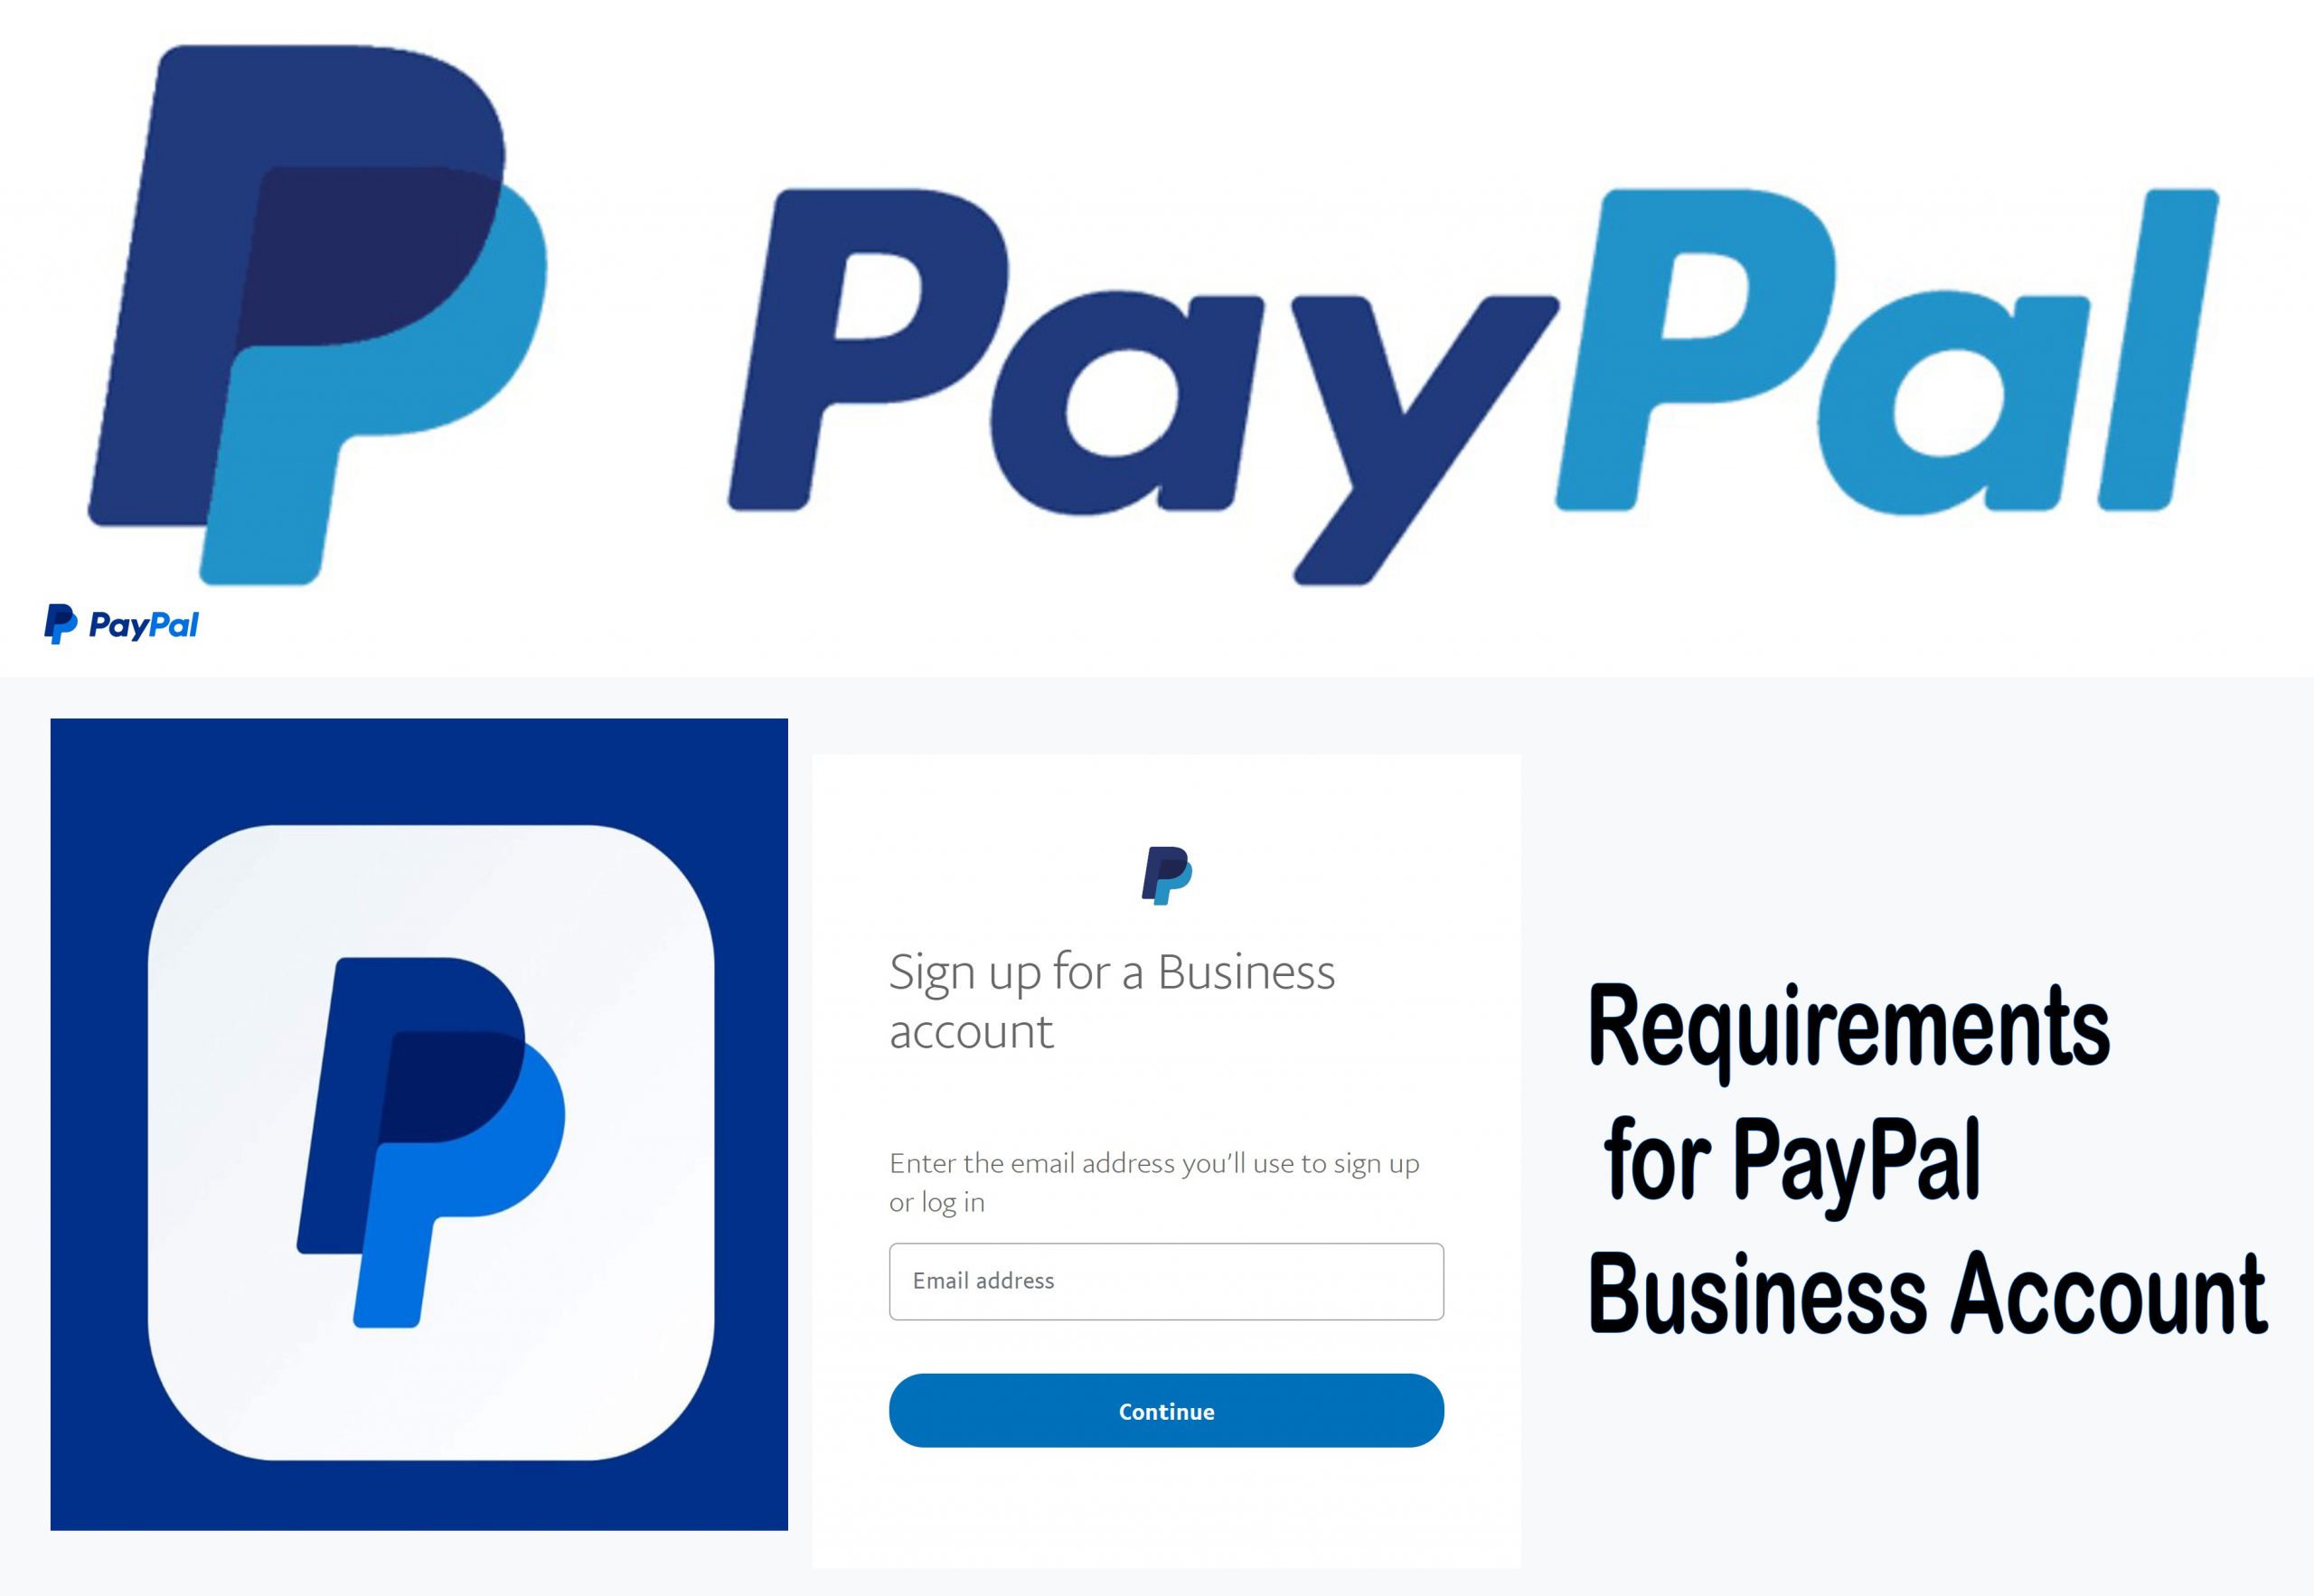 Requirements for PayPal Business Account